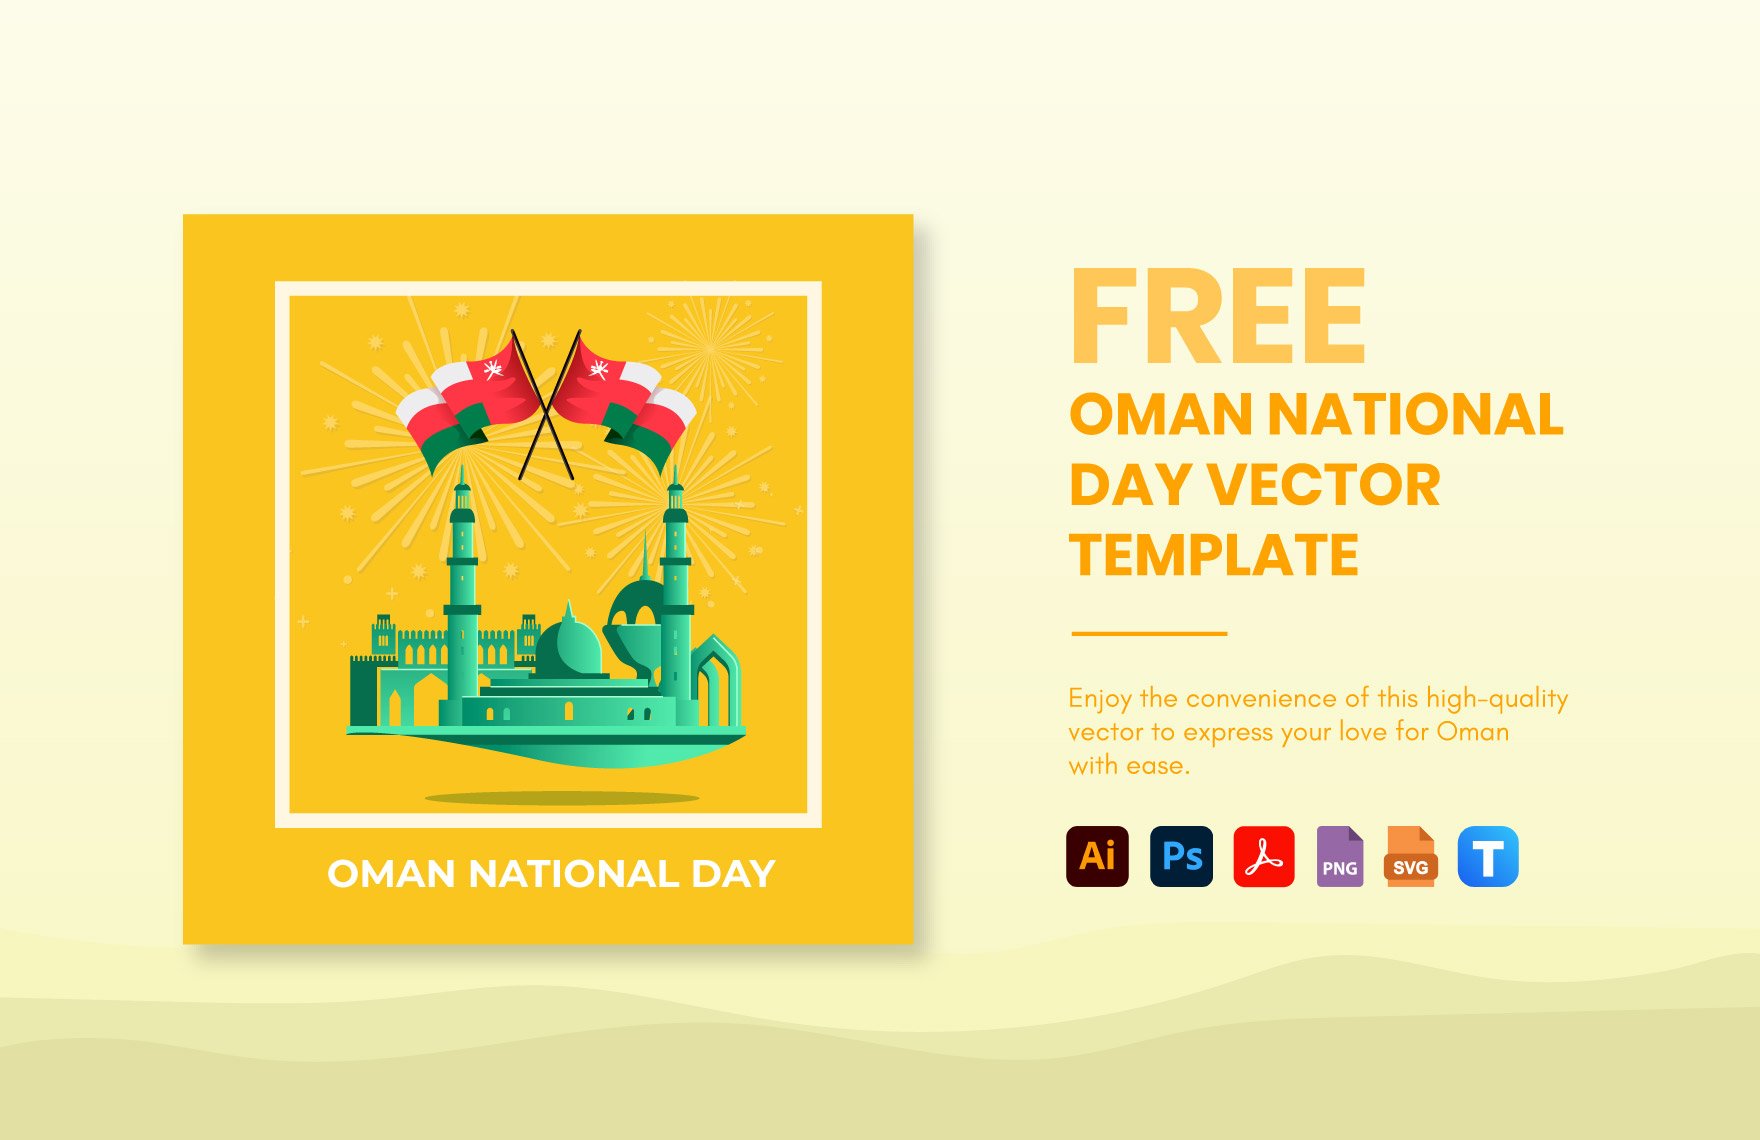 Free Oman National Day Vector in PDF, Illustrator, PSD, SVG, PNG